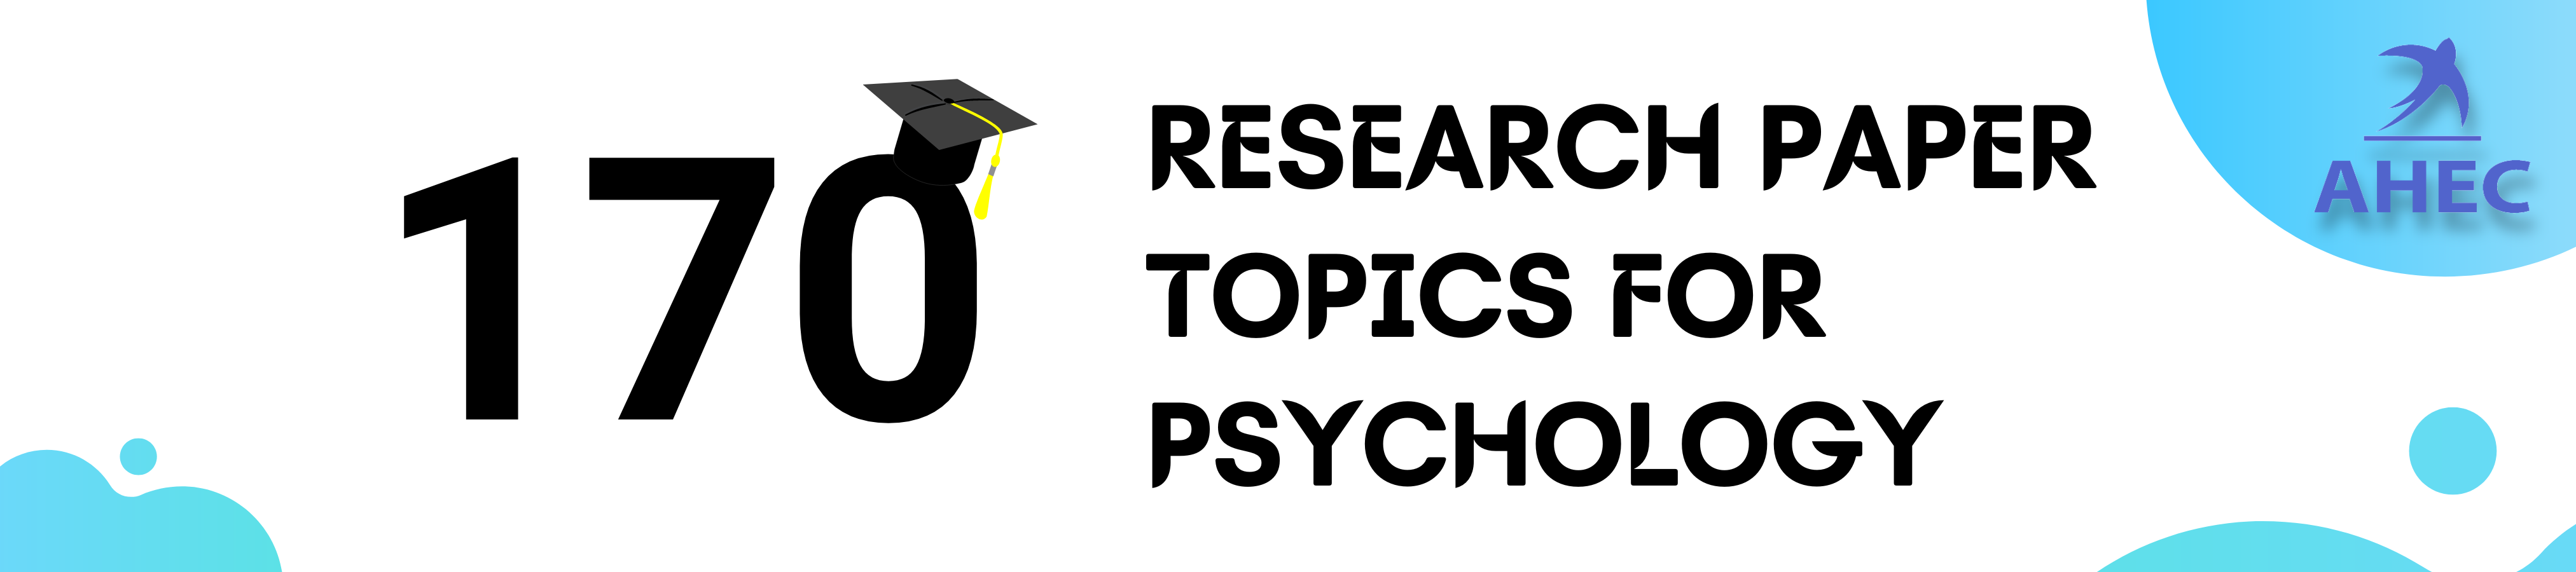 170+ RESEARCH PAPER TOPICS FOR PSYCHOLOGY | AHECounselling